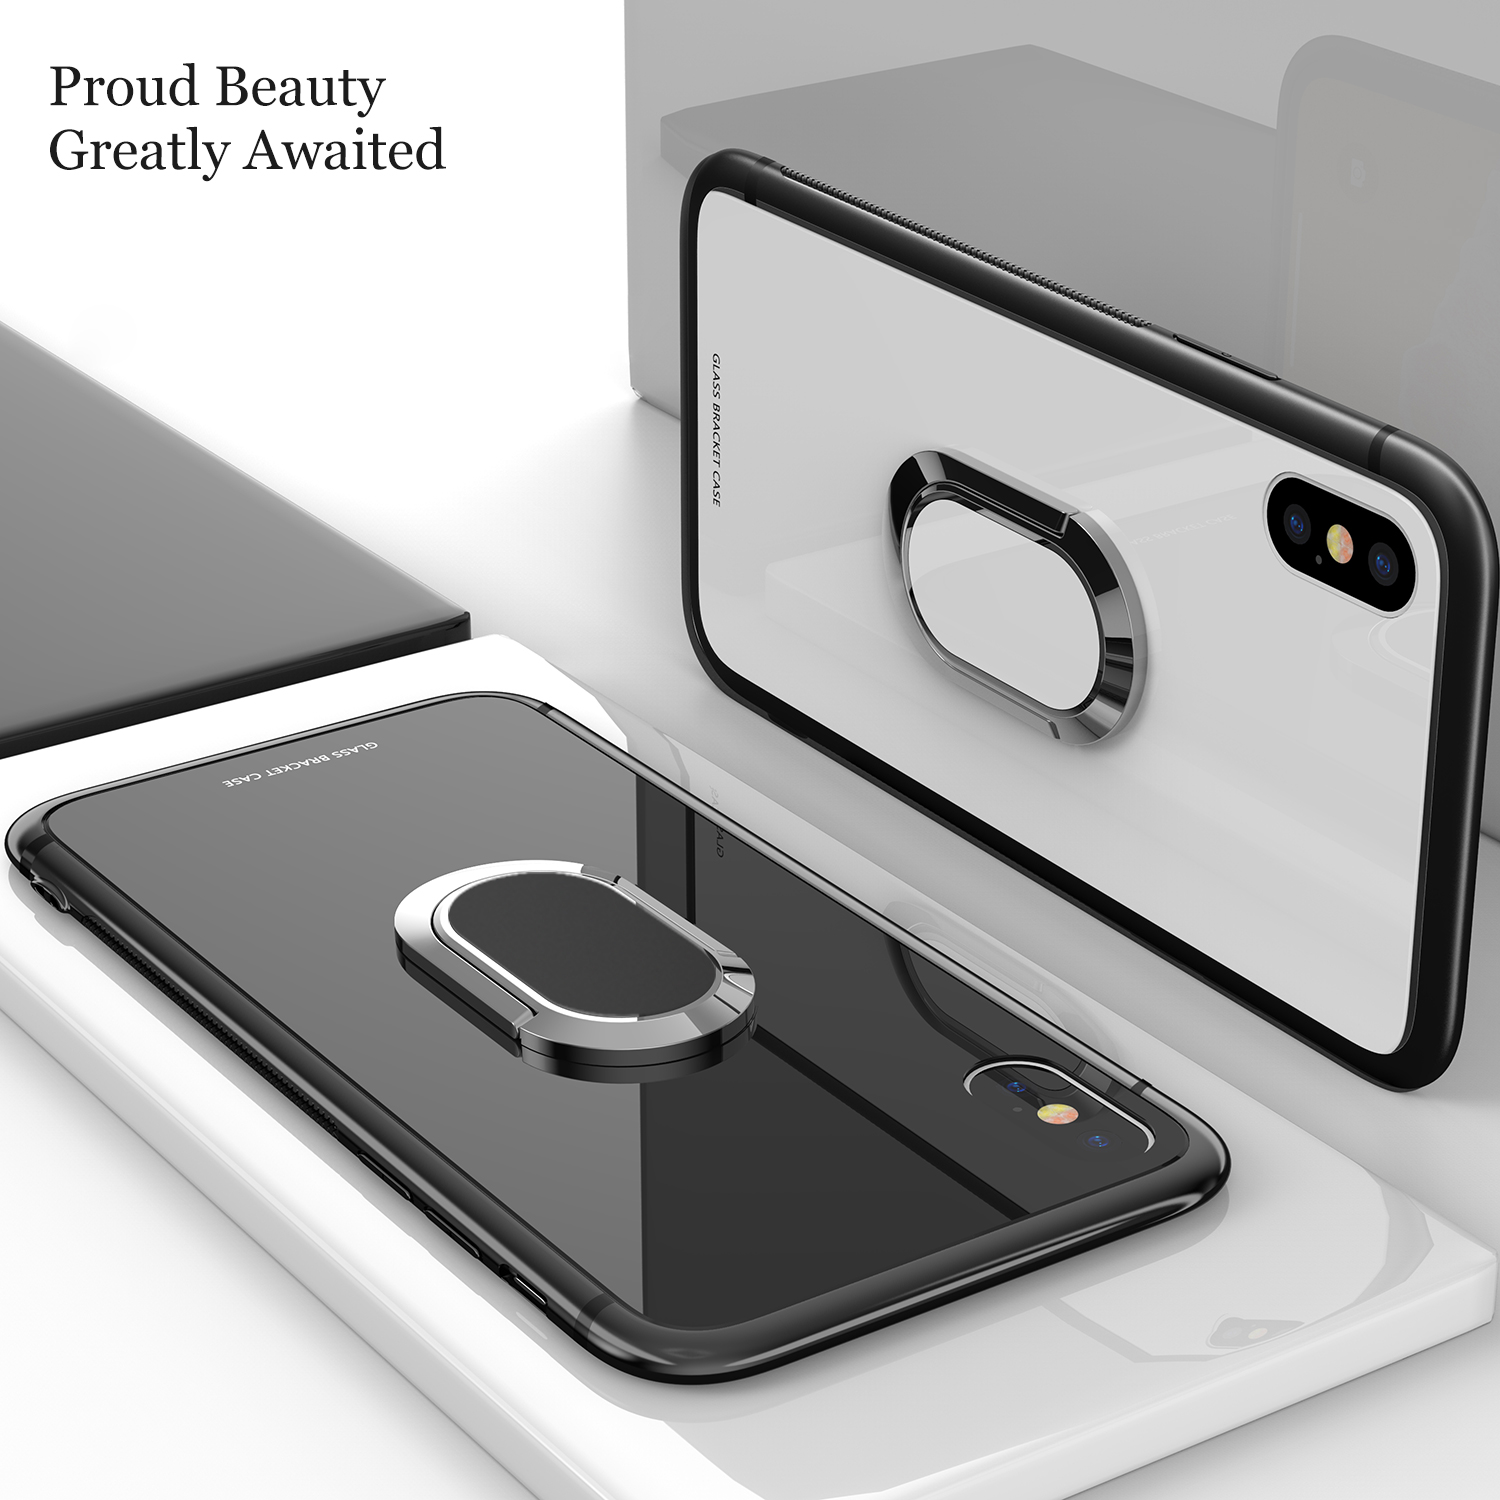 Bakeey-360deg-Rotation-Ring-Kickstand-Magnetic-Glass-Protective-Case-for-iPhone-X-1320685-11